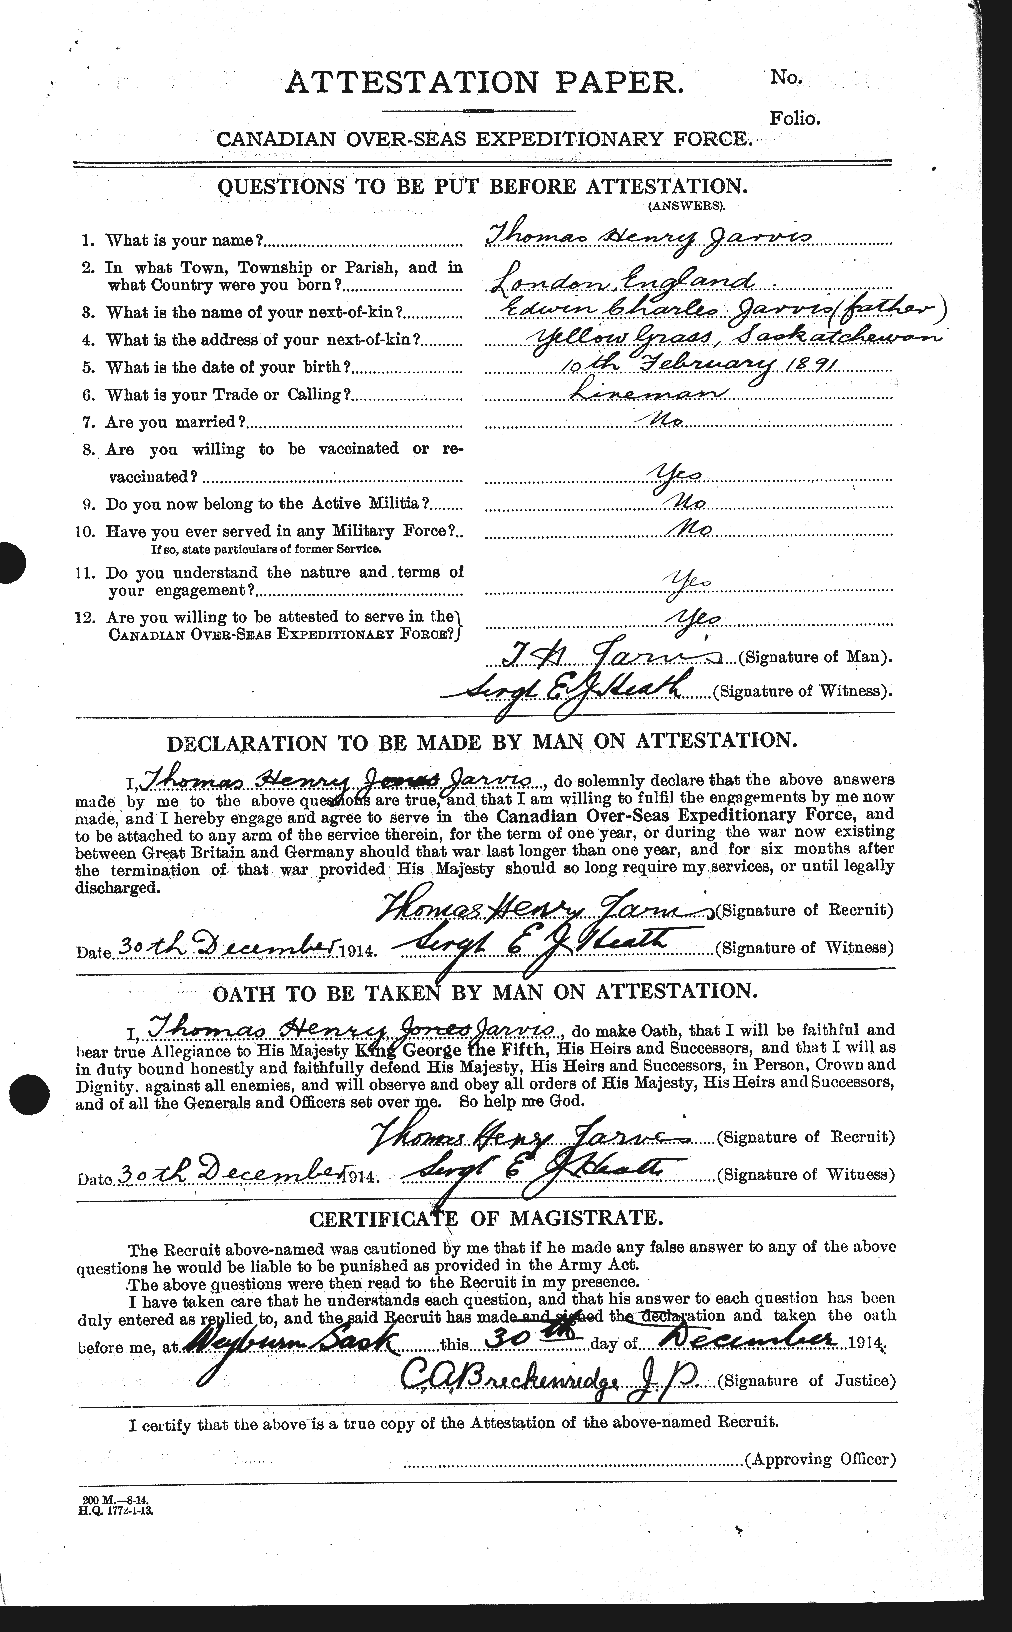 Personnel Records of the First World War - CEF 415863a